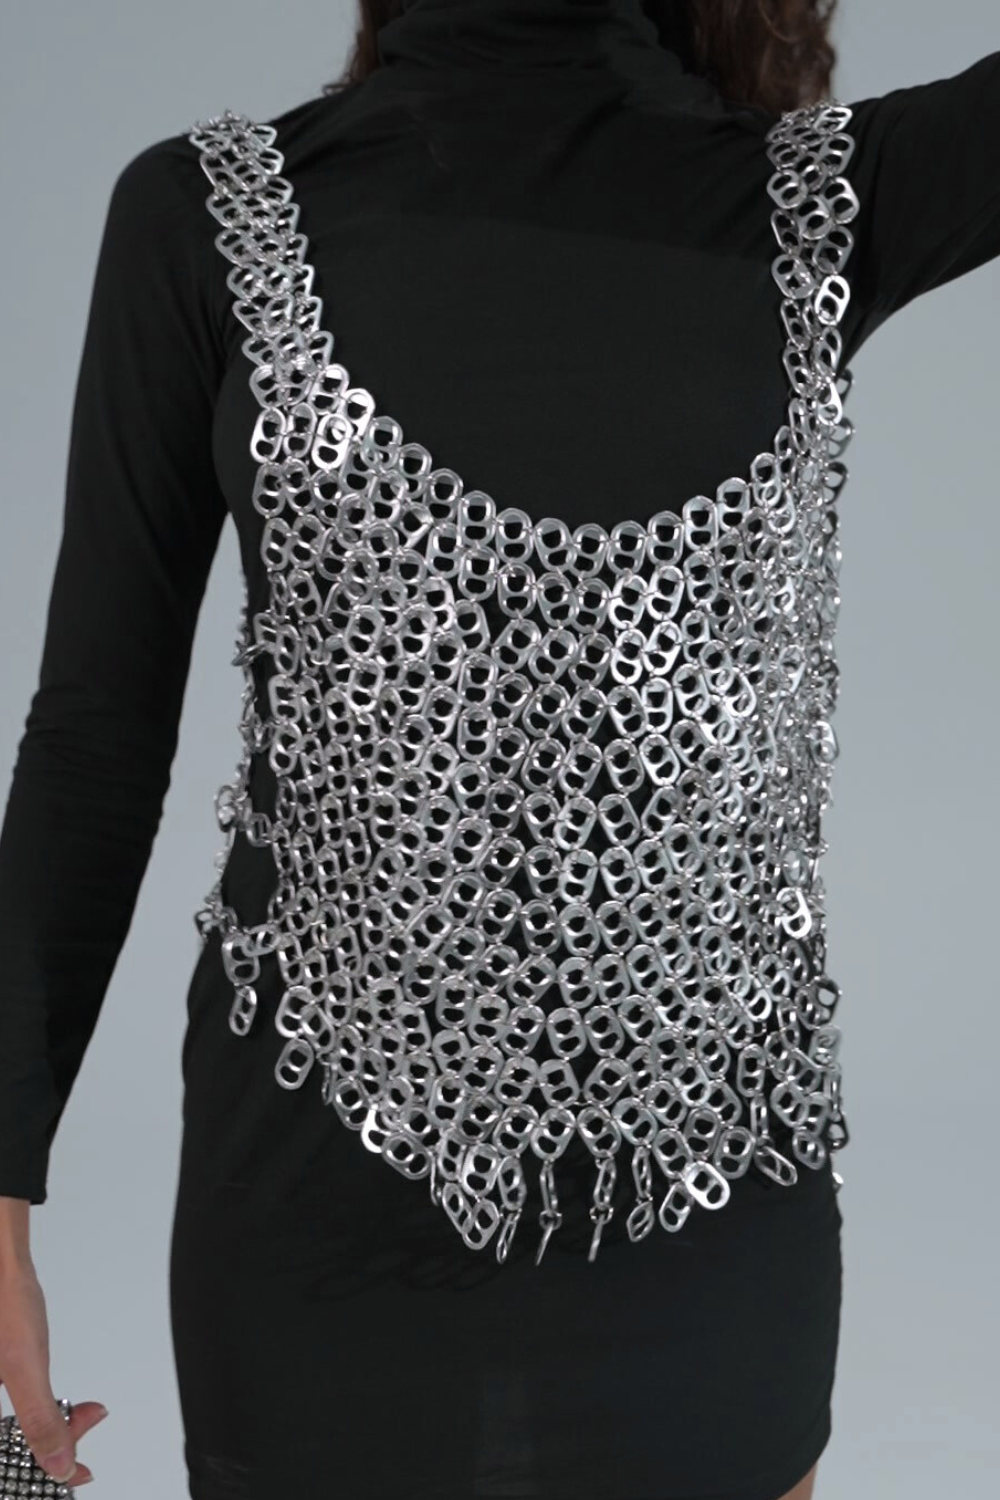 Chain Reaction Top